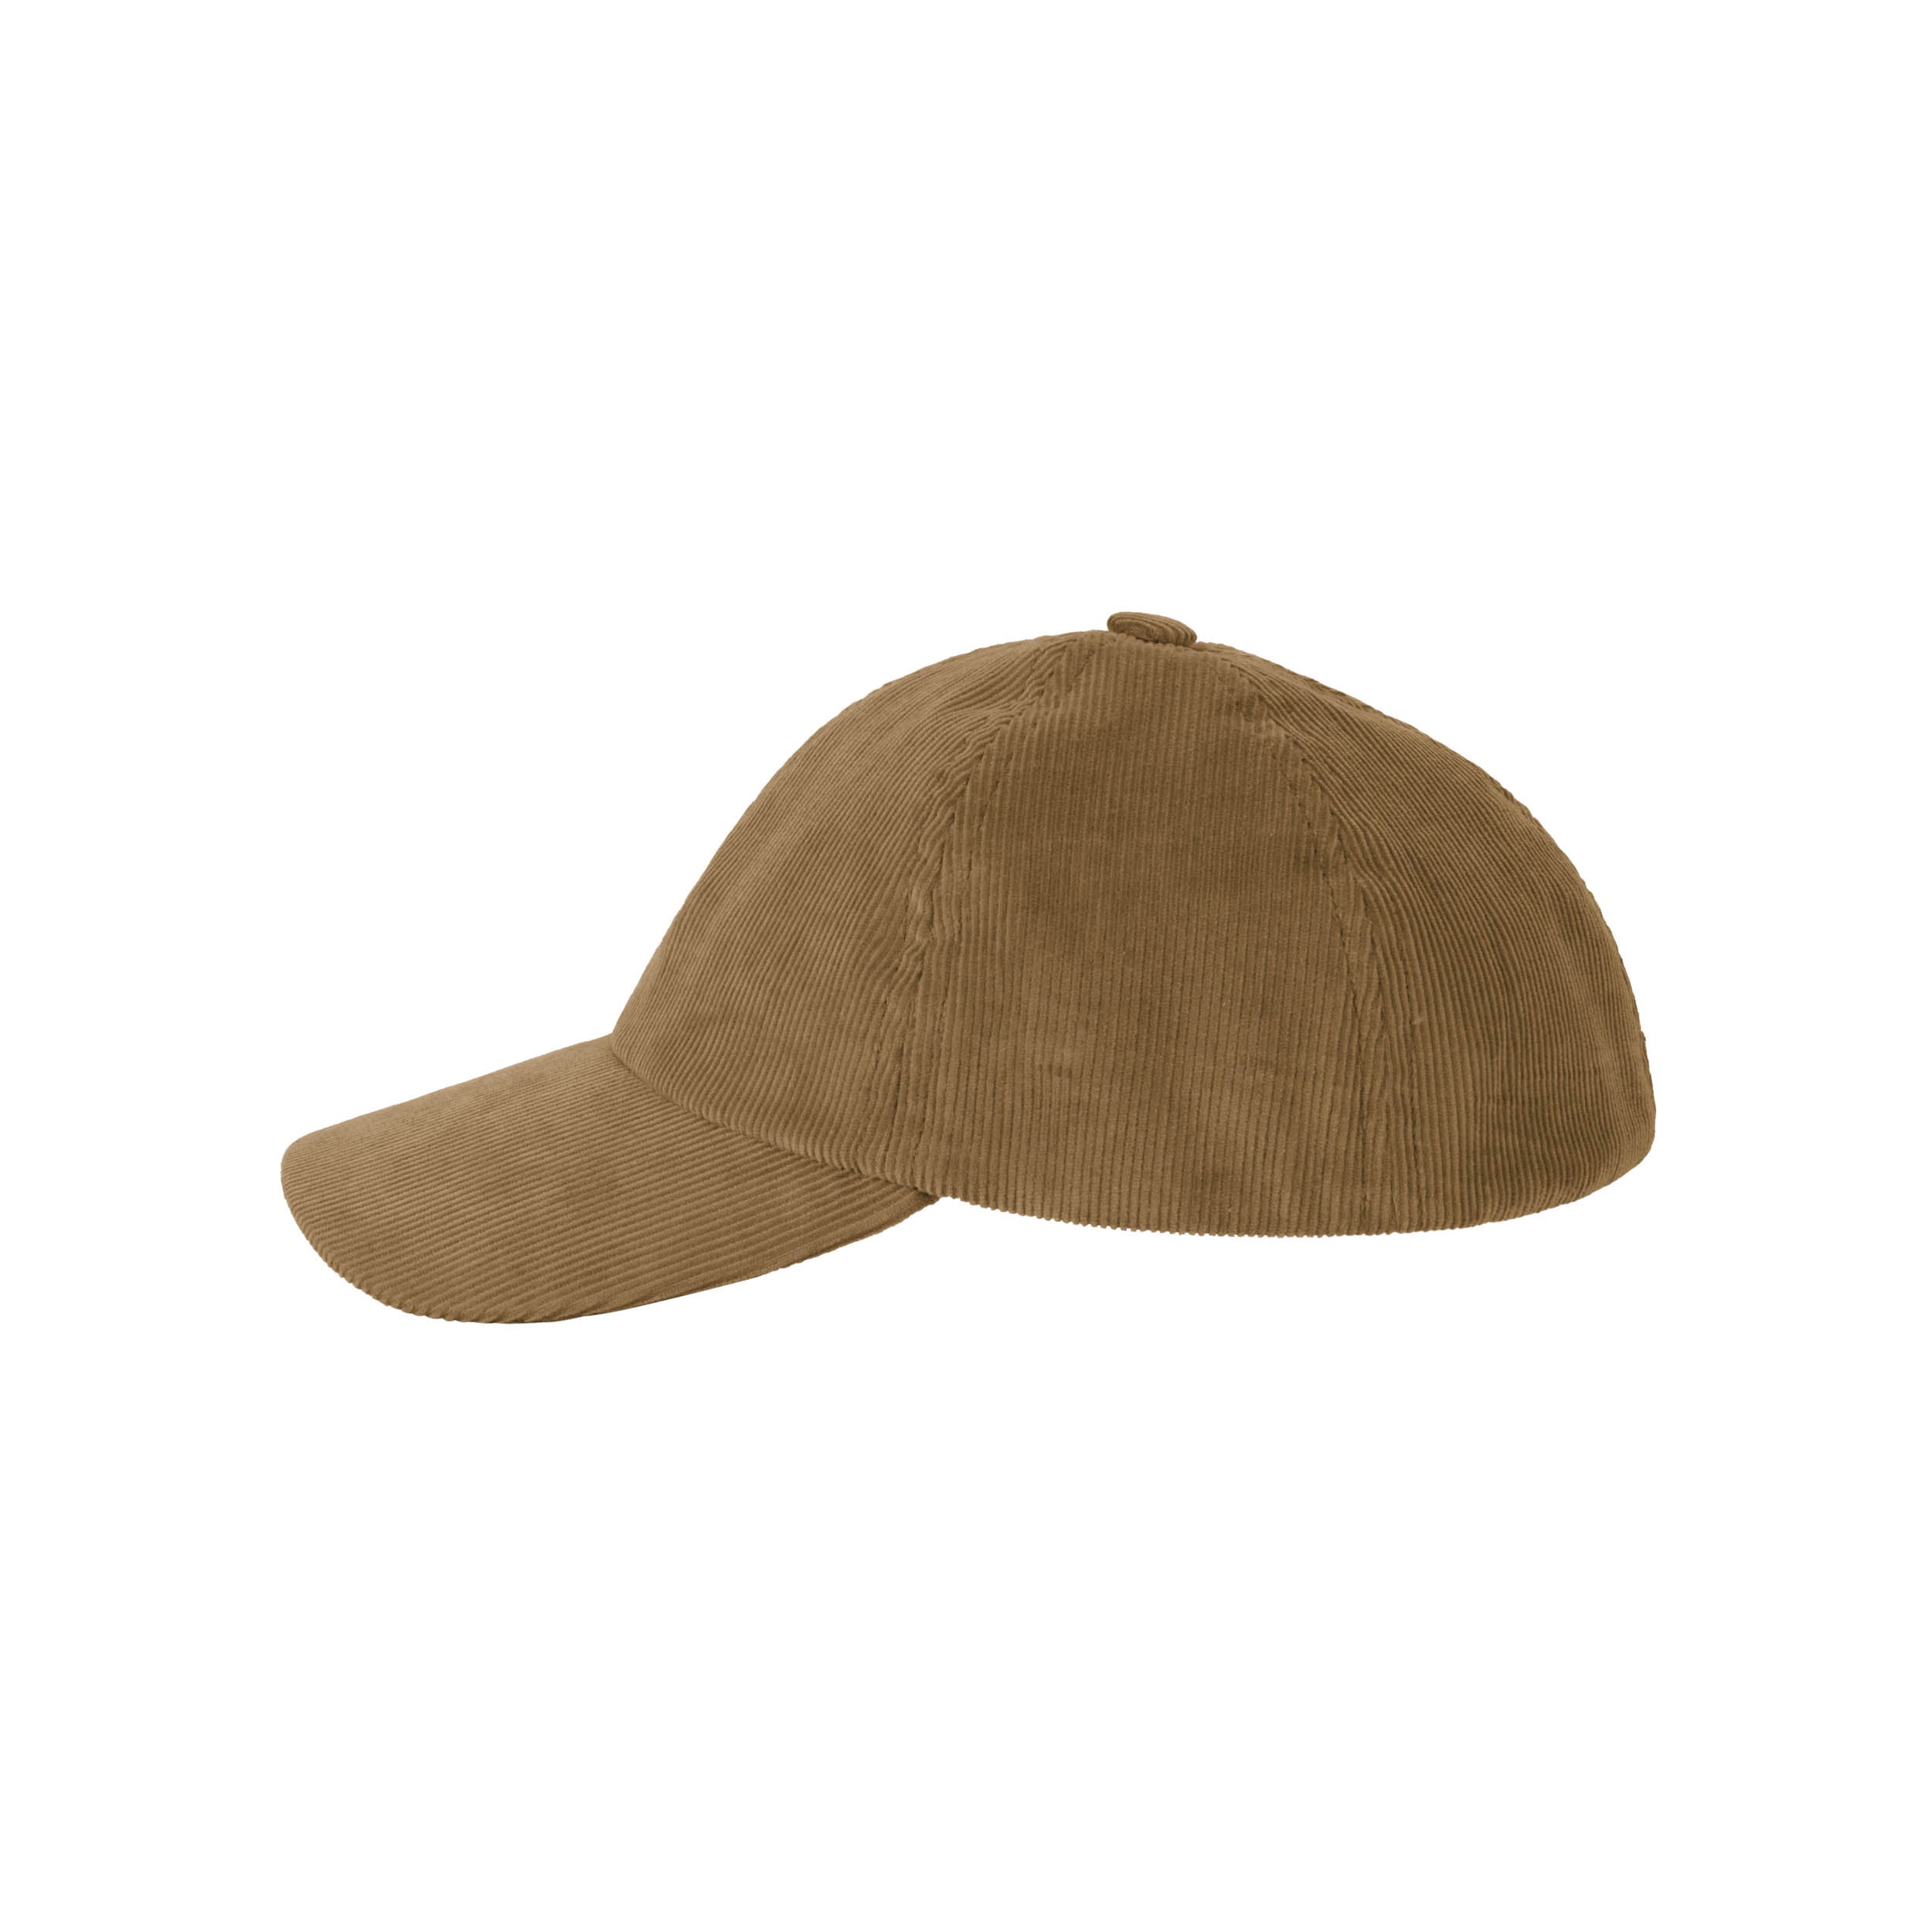 Carrier Company Corduroy Baseball Cap in Olive